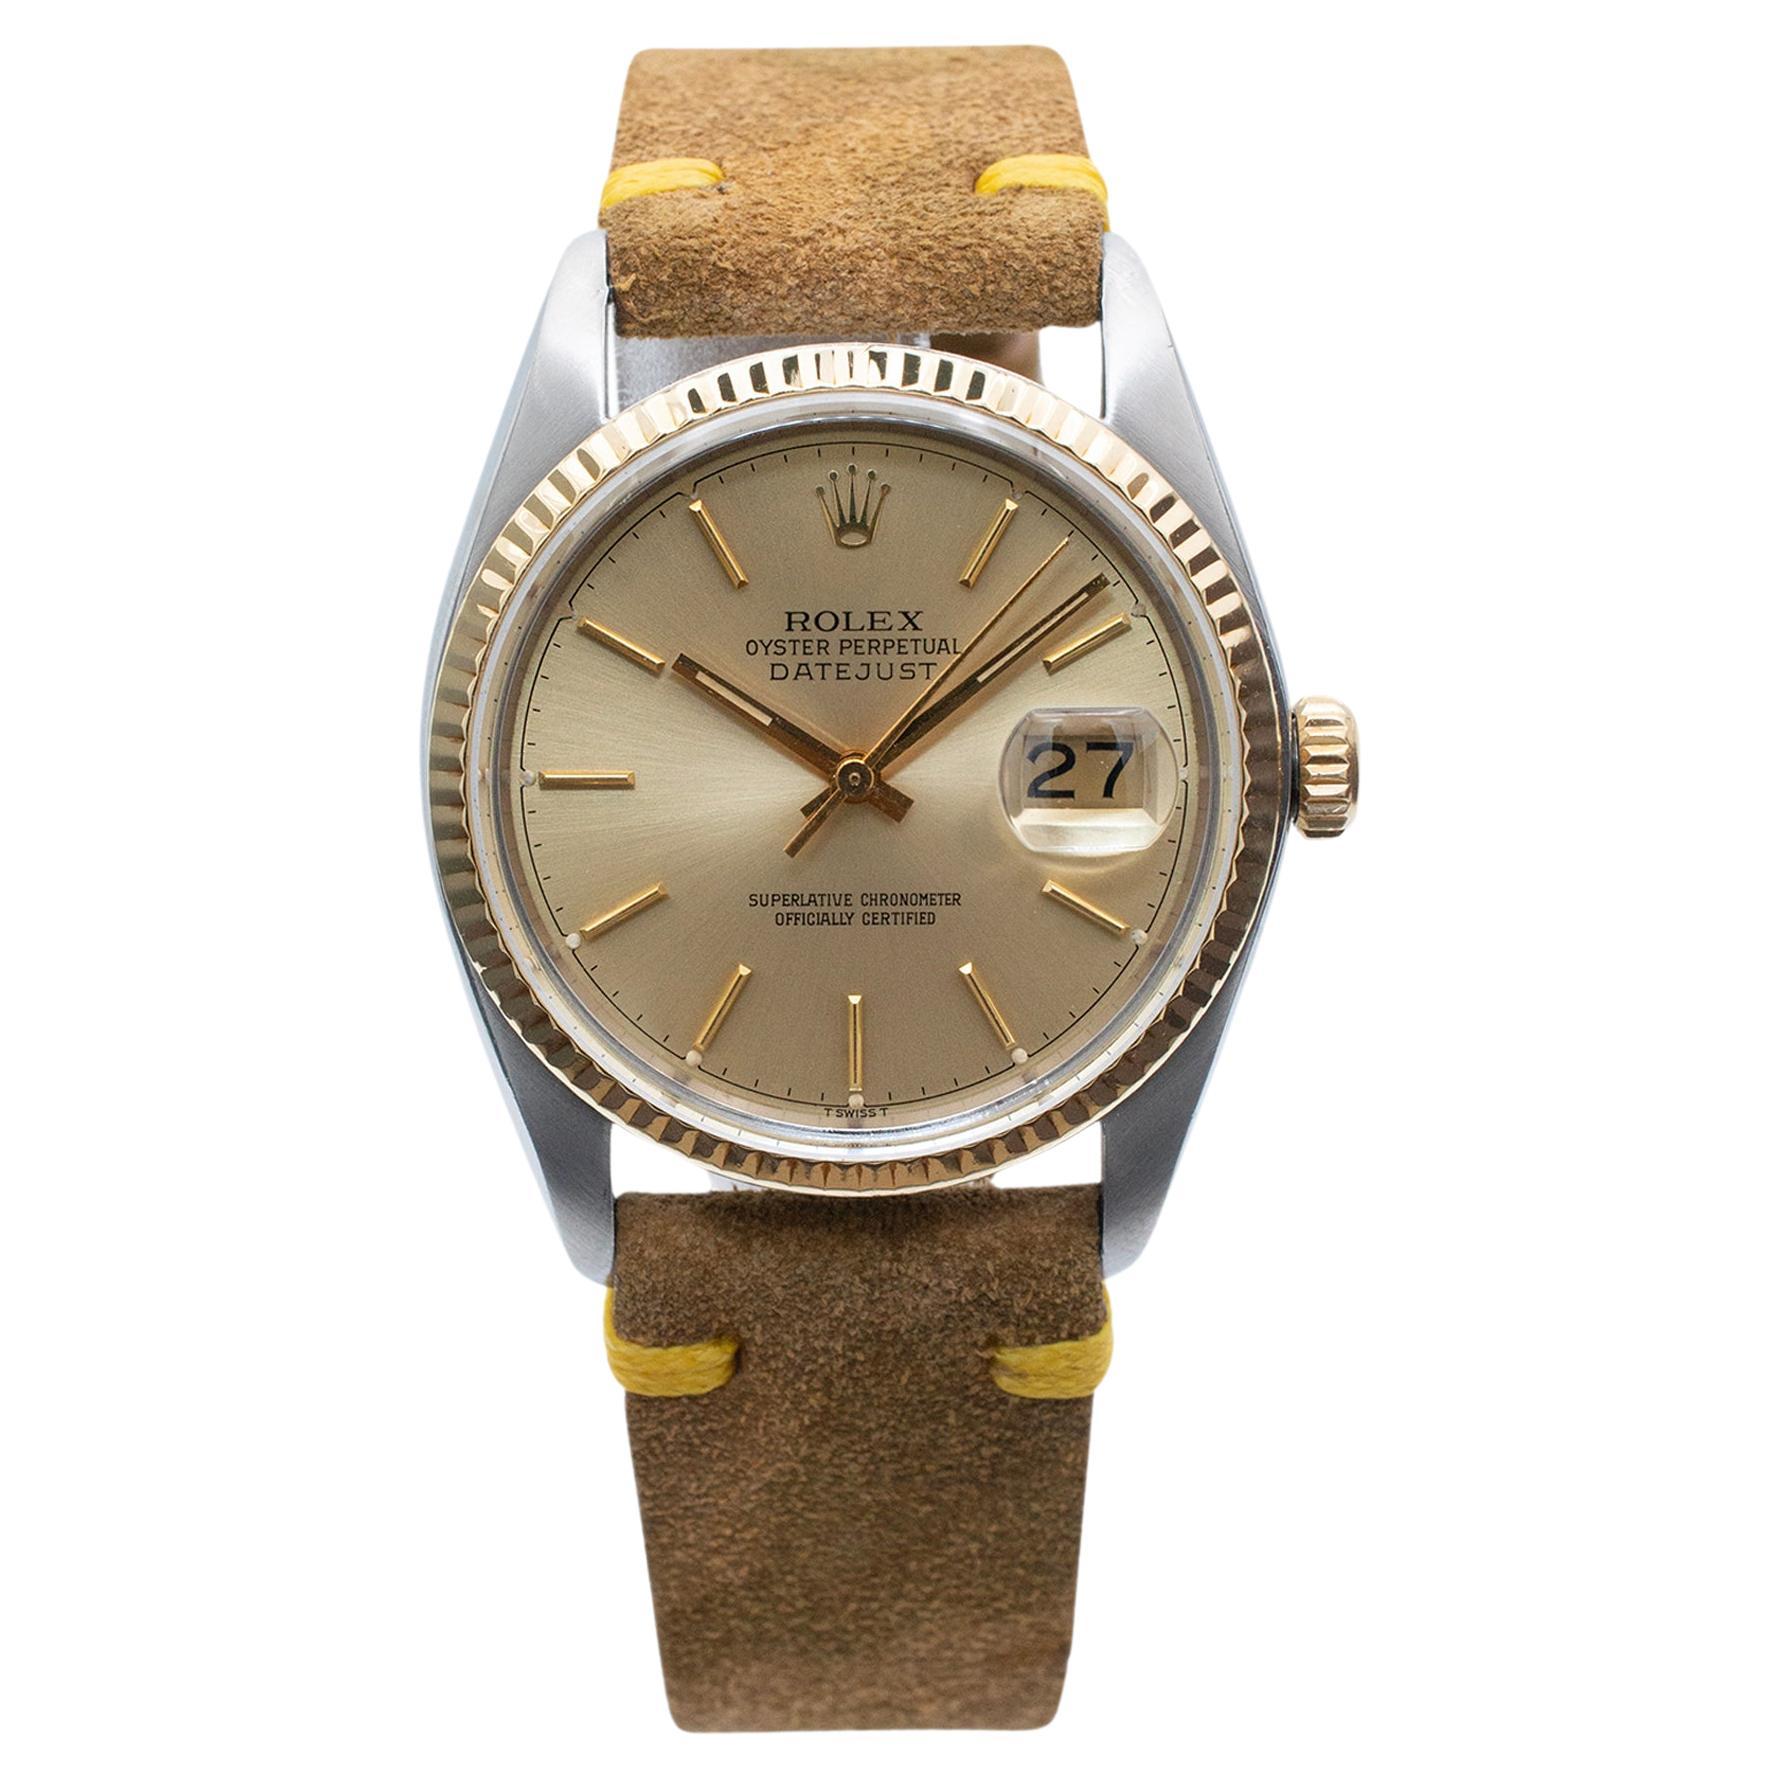 Vintage 1977 Rolex Datejust 36MM 16013 Stainless Steel & 18K Yellow Gold Watch For Sale